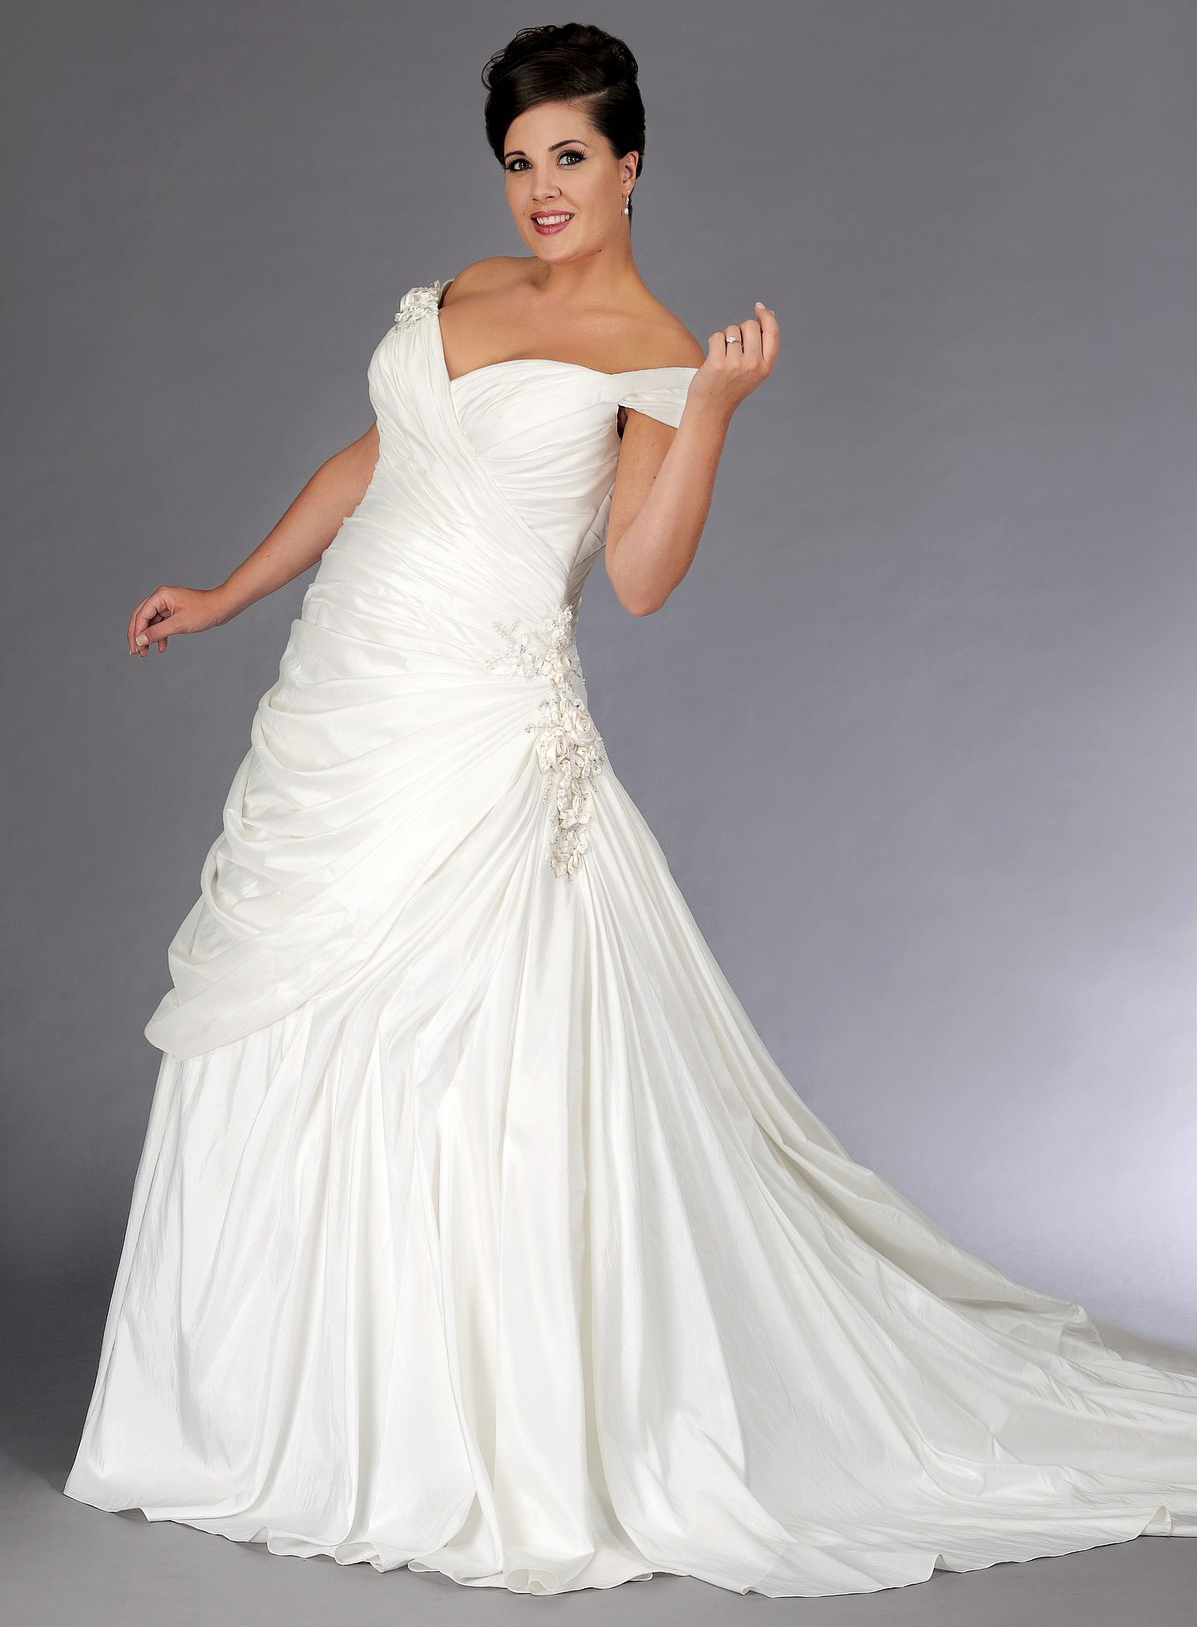 Great Super Plus Size Wedding Dresses Learn More Here Greewedding1